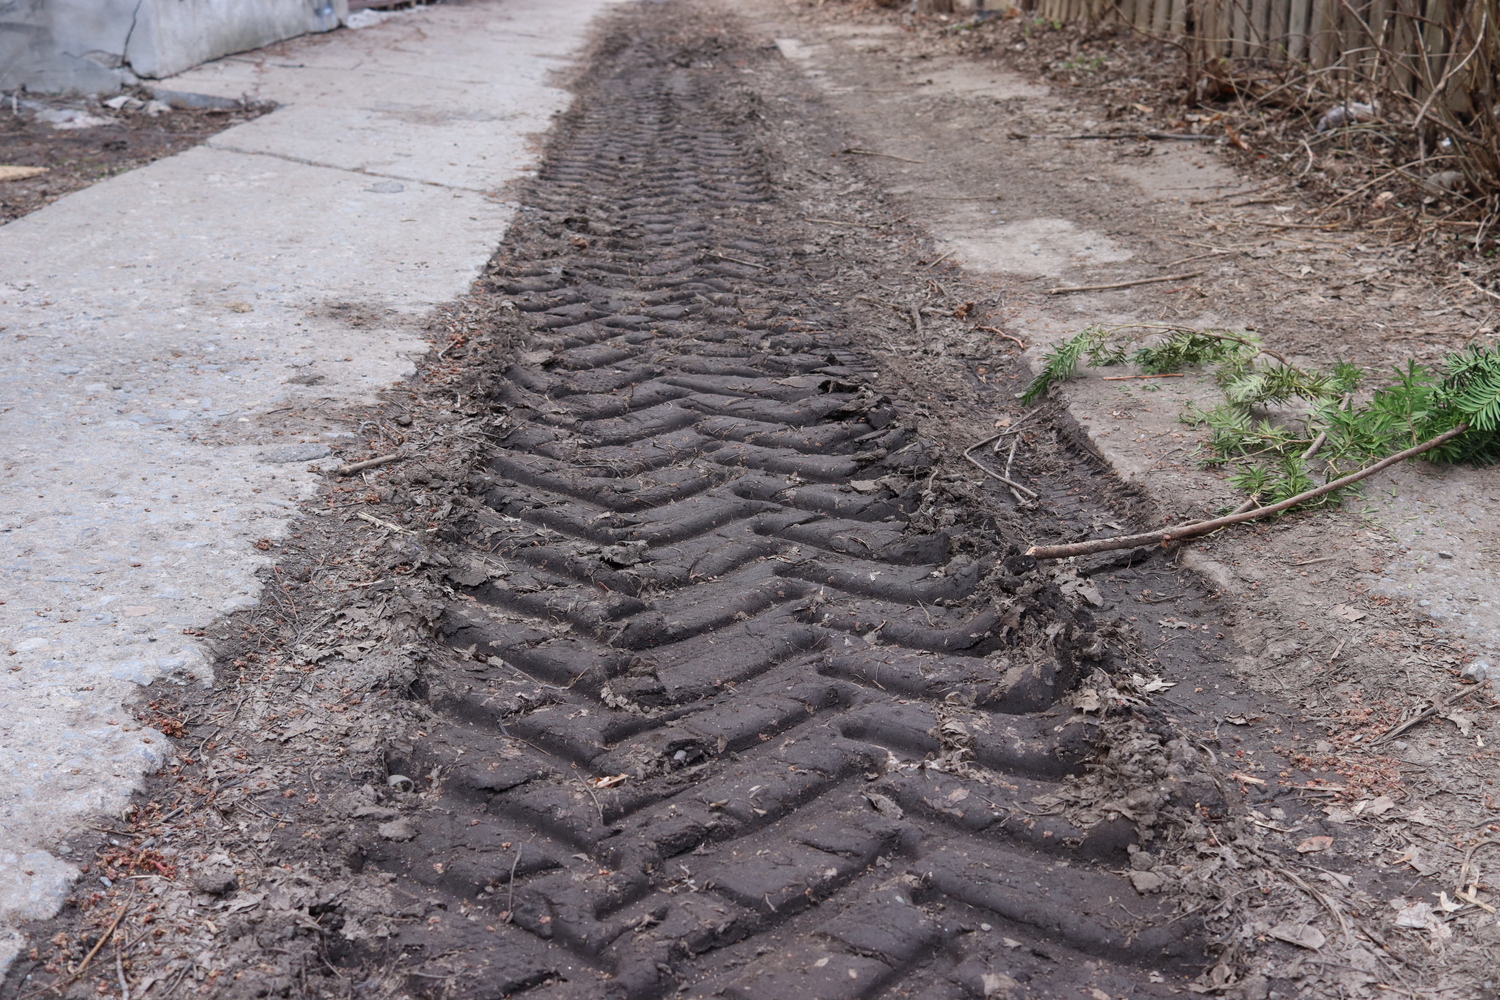 deep tire tread pressed into mud in the center of an alley.
a small branch of evergreen lies to one side.